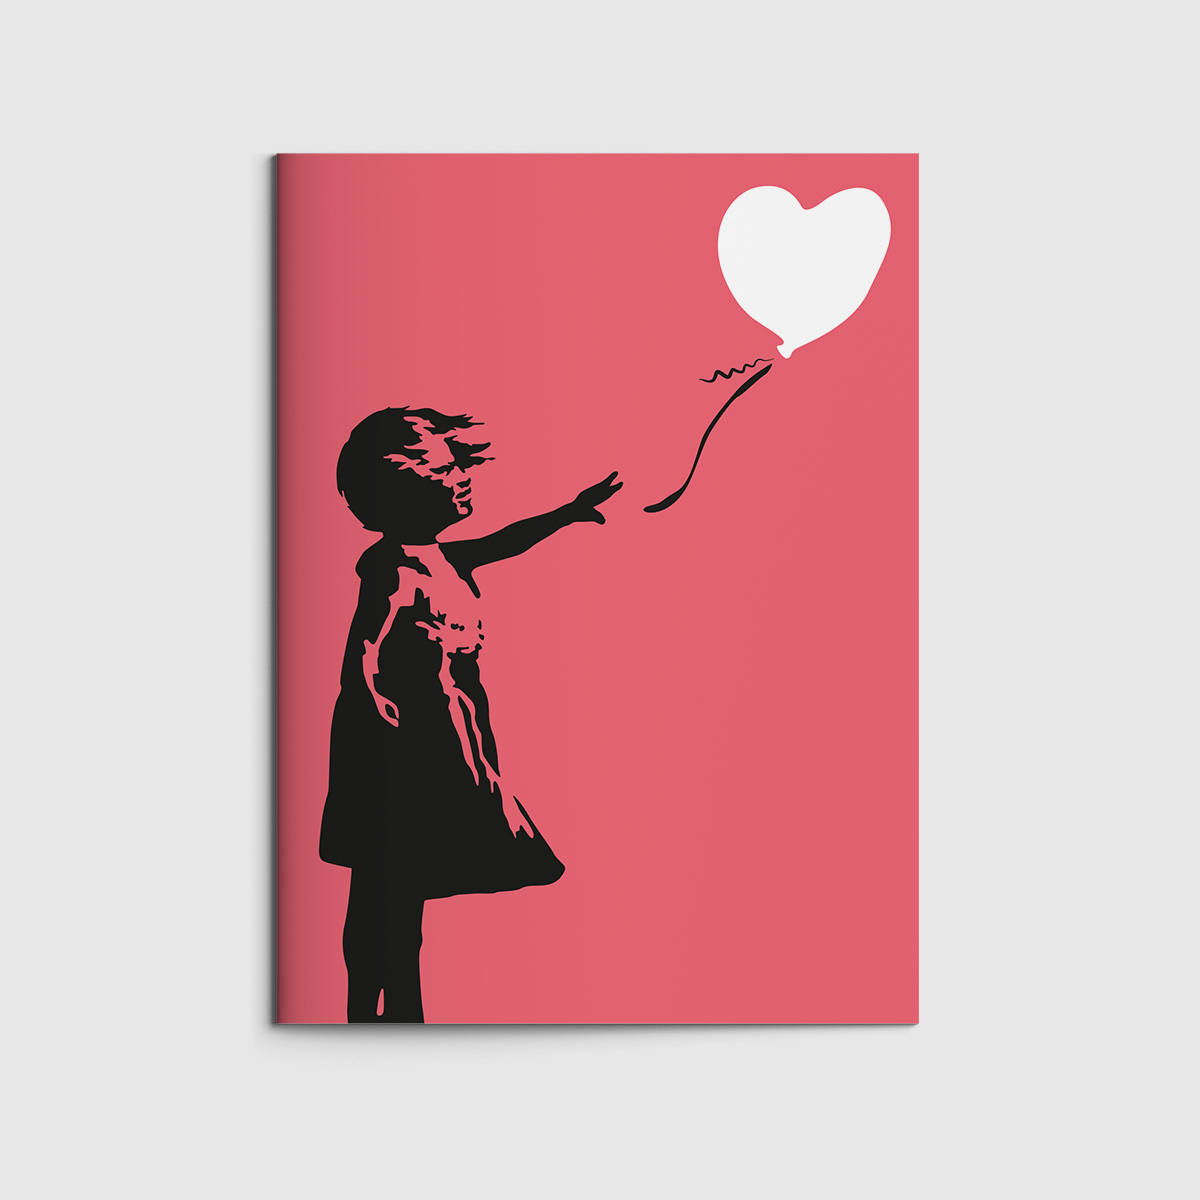 Booklet A5 - Museum Art - neon girl with heart balloon